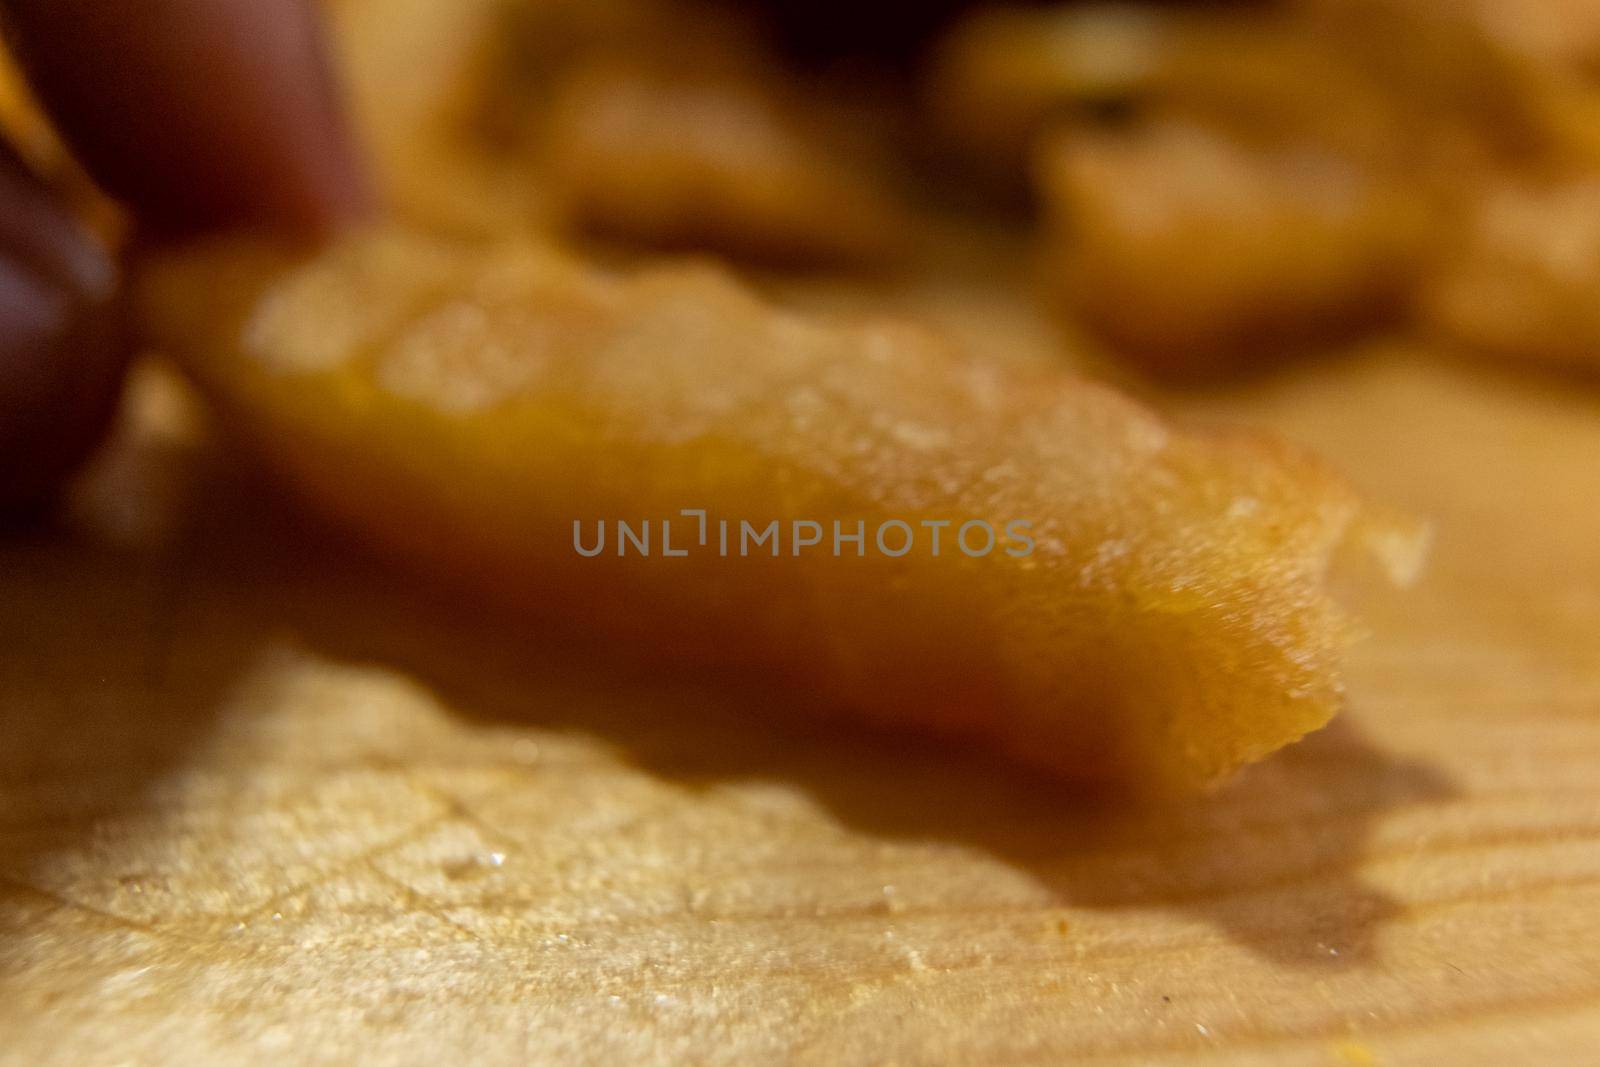 Close-up of fingers grabbing wavy French fry on wooden surface by Kanelbulle